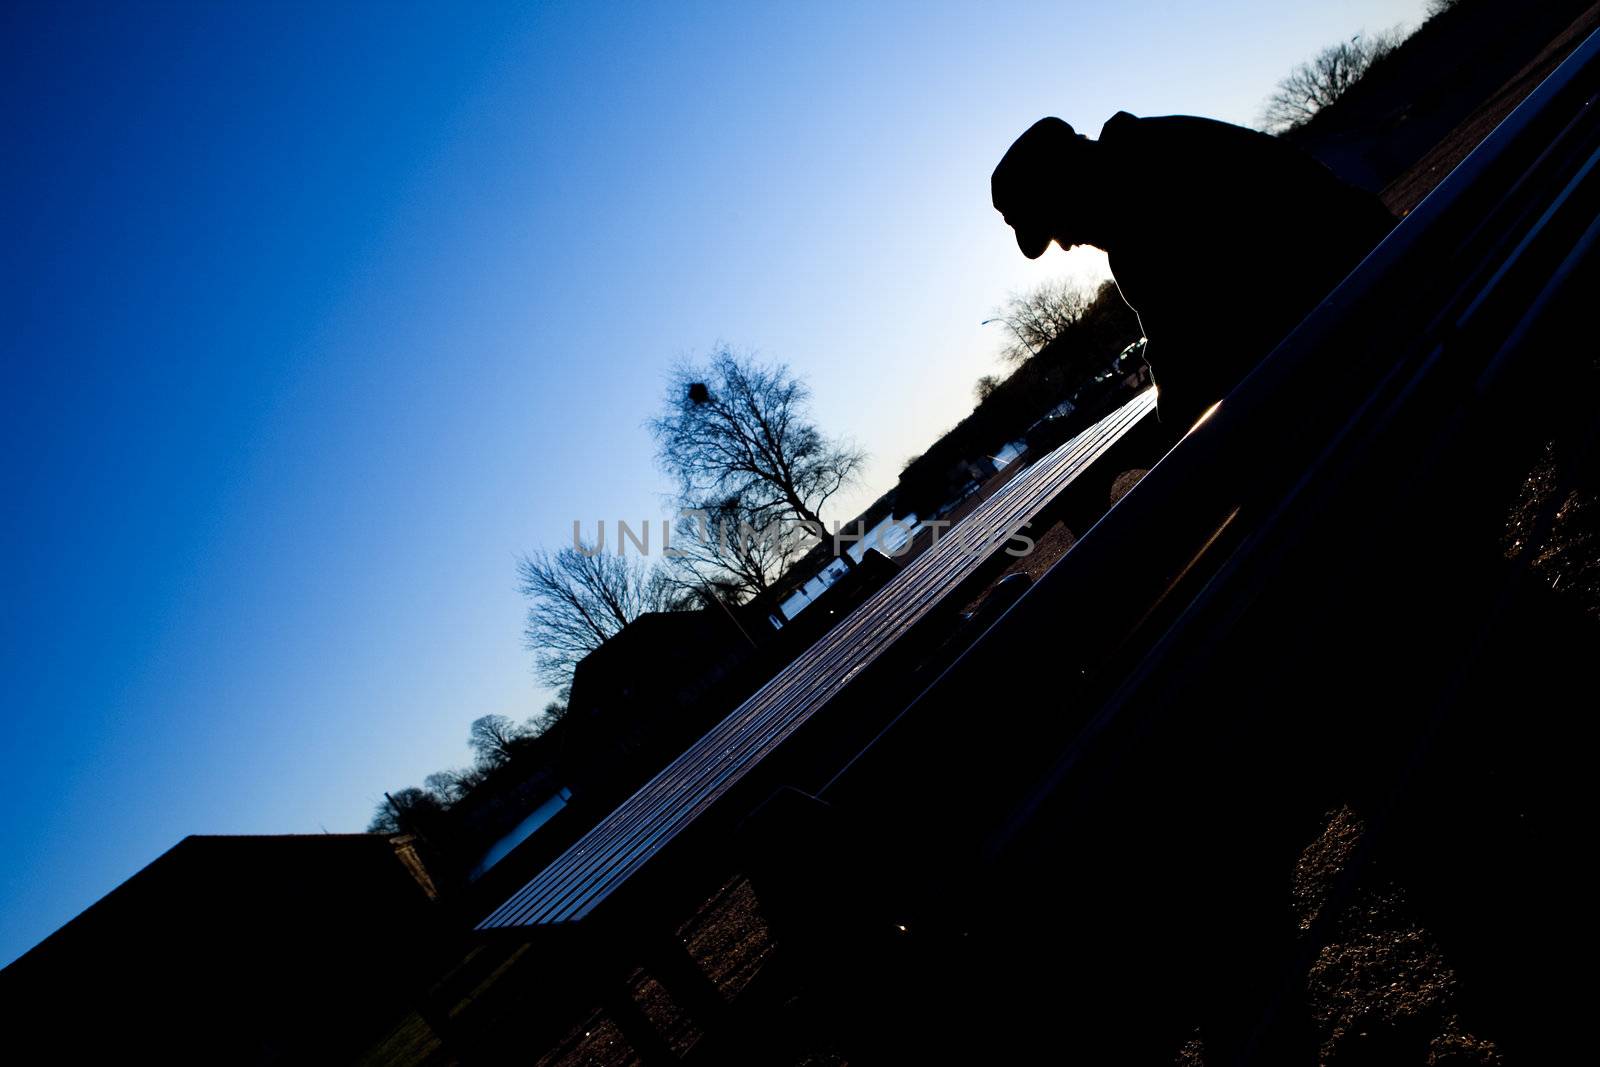 A depressed thoughtful sitting on a park bench in cold winter scene.